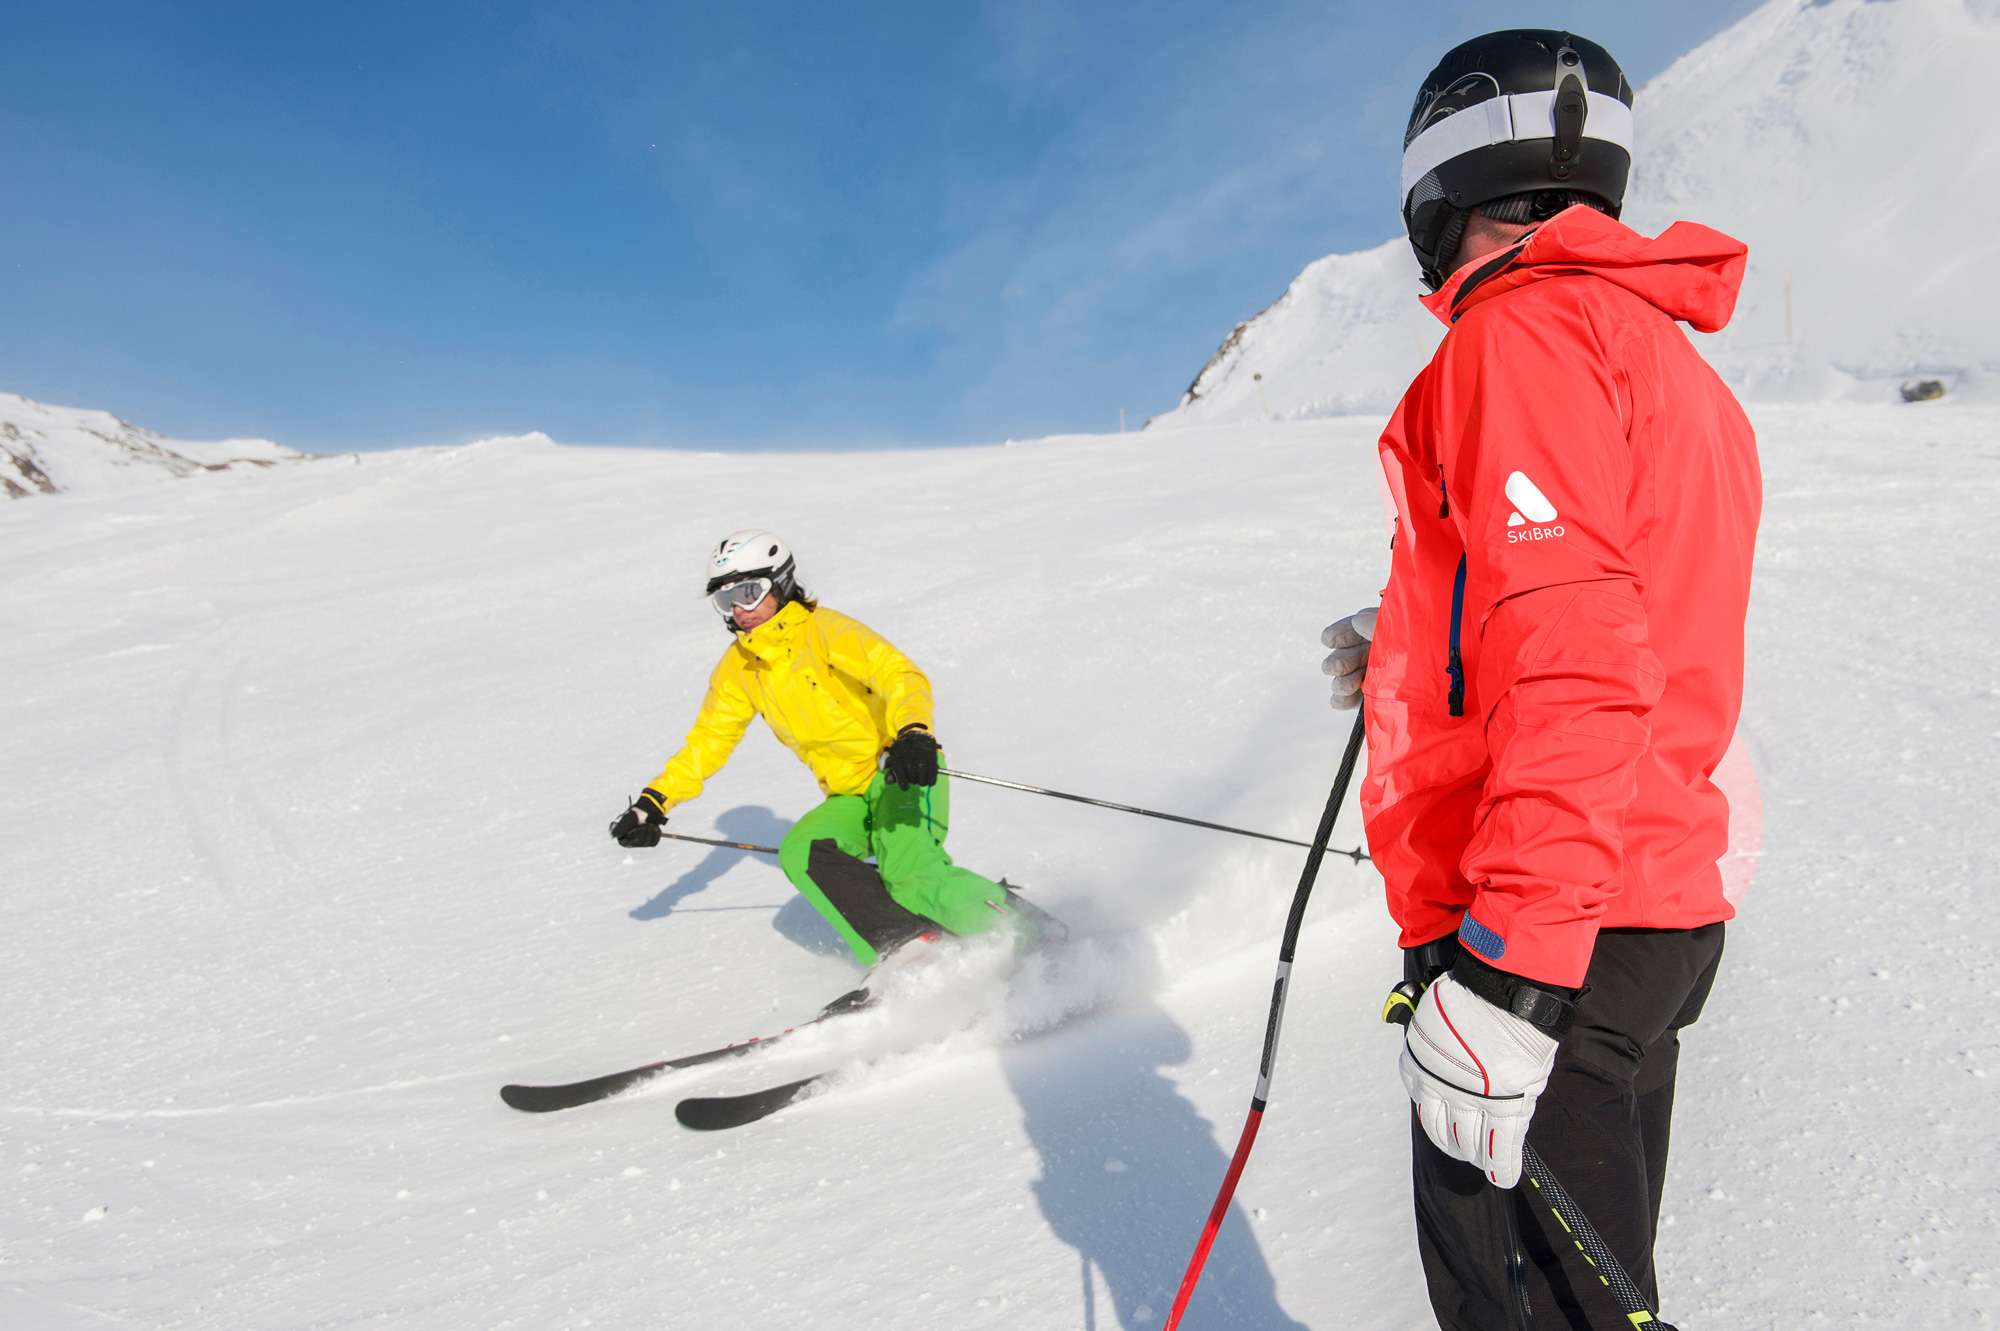 ski instructor in red jacket watches student carve on ski run